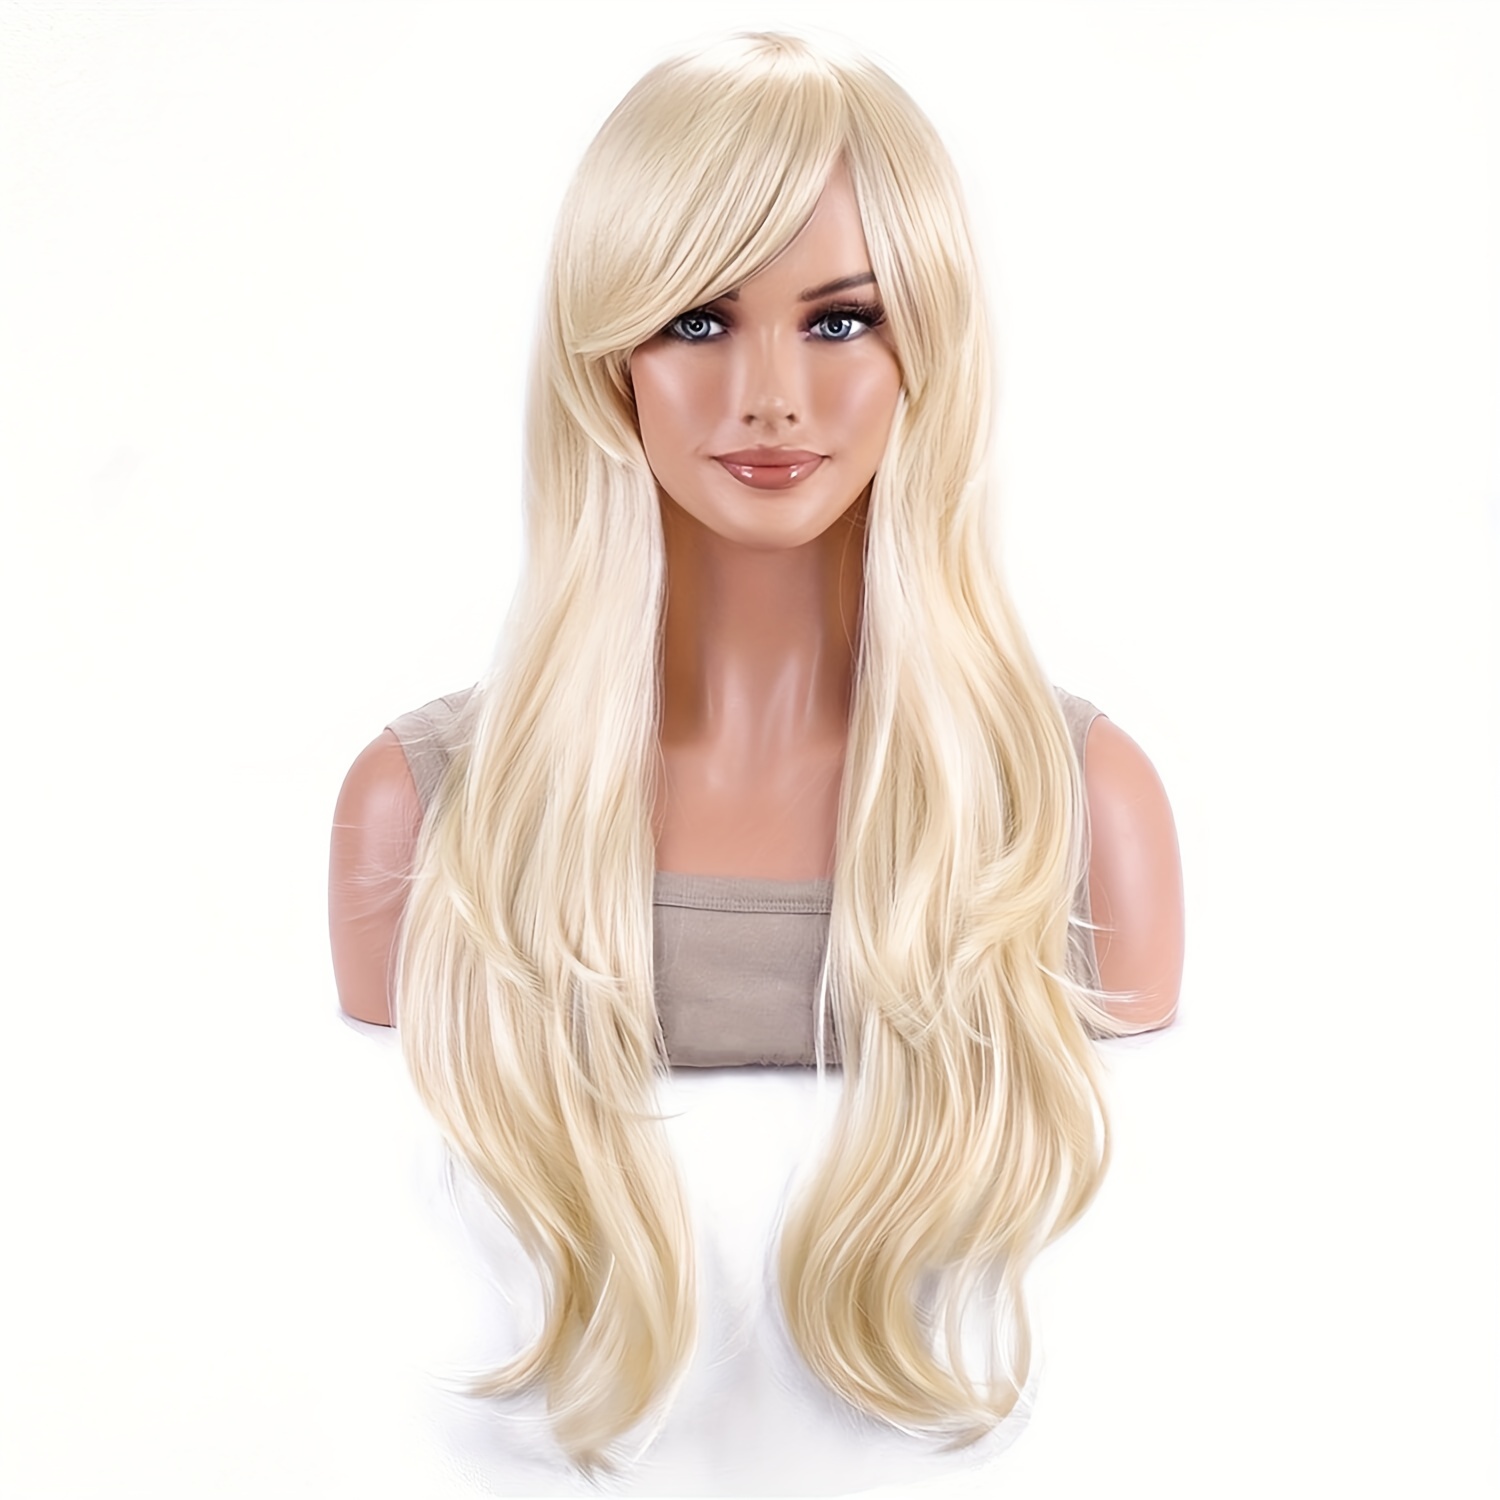 

Costume Wigs Golden Blonde Long Curly Synthetic Wig With Bangs Movie Cosplay Wig For Halloween Cosplay Party